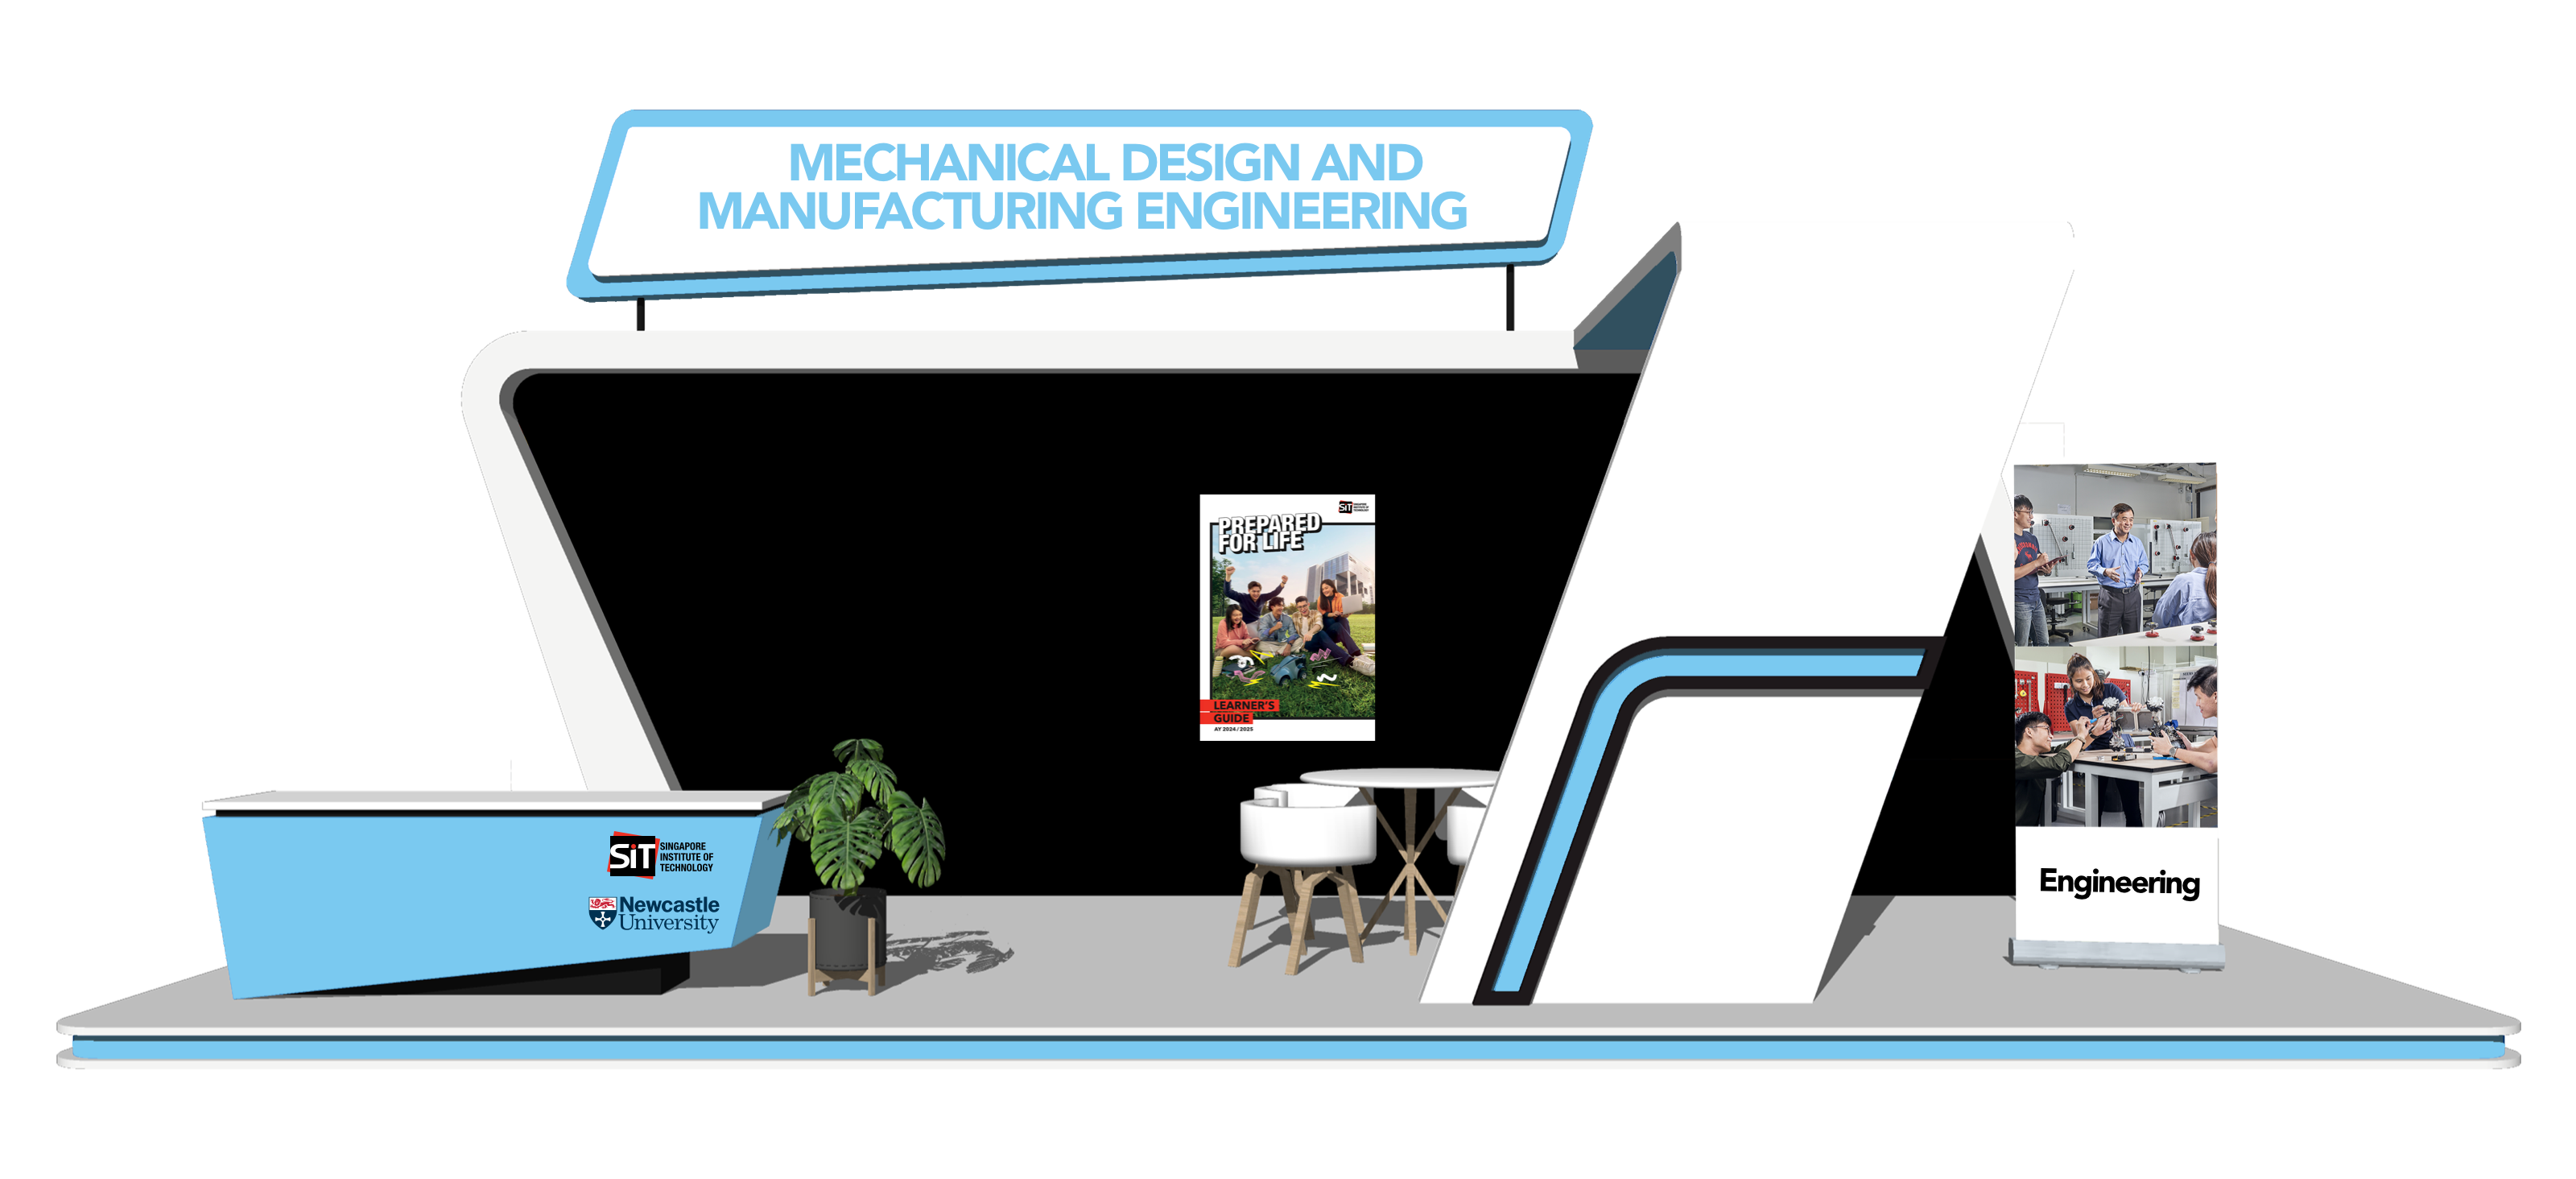 Mechanical Design and Manufacturing Engineering (SIT & Newcastle University)